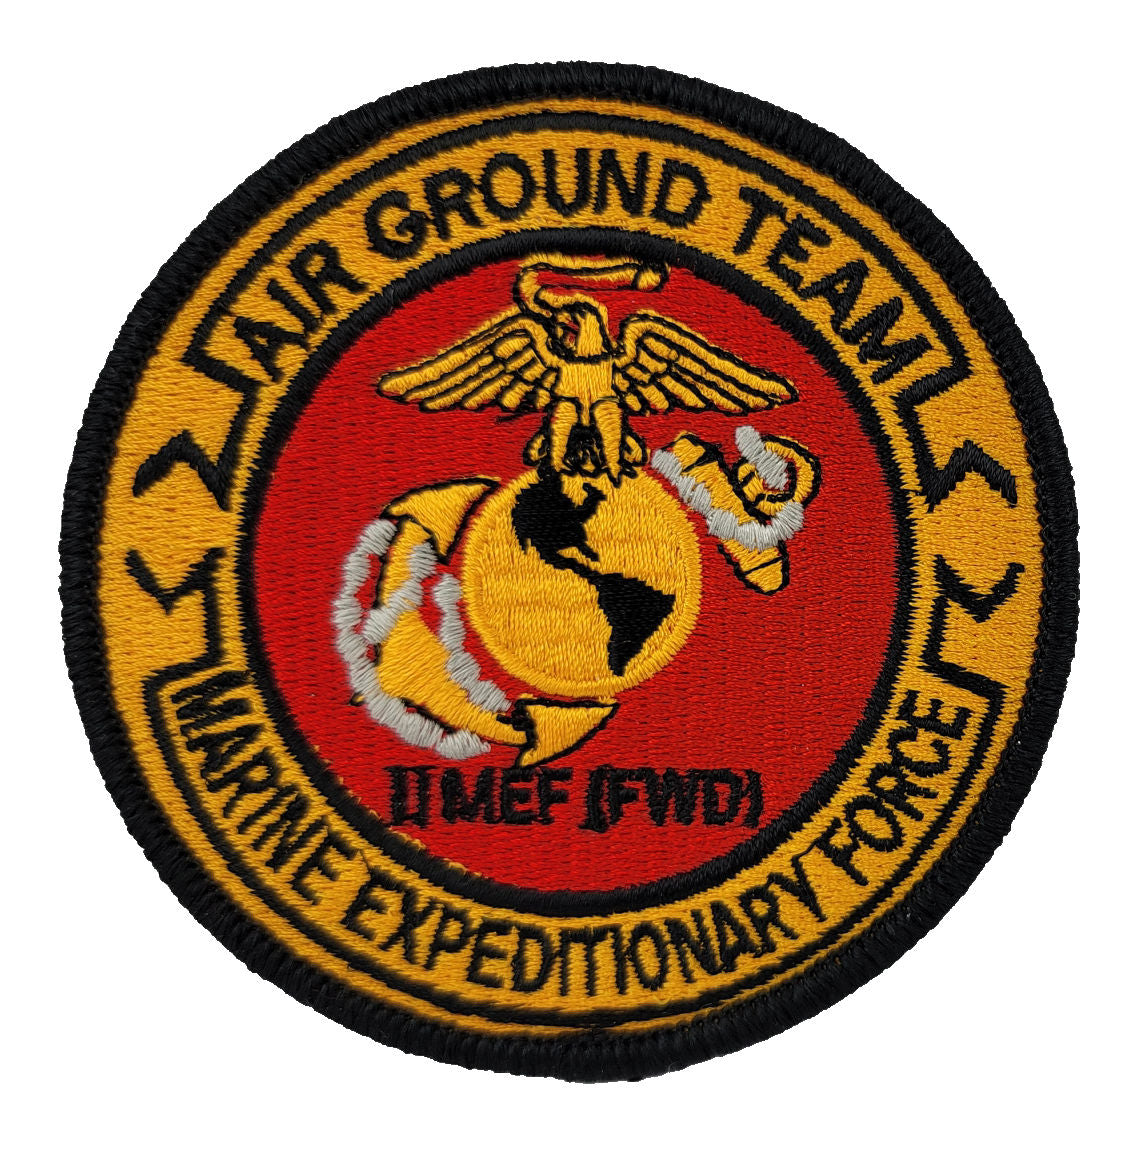 II MEF 2nd MEF Marine Expeditionary Force FWD Patch - Full Color Dress